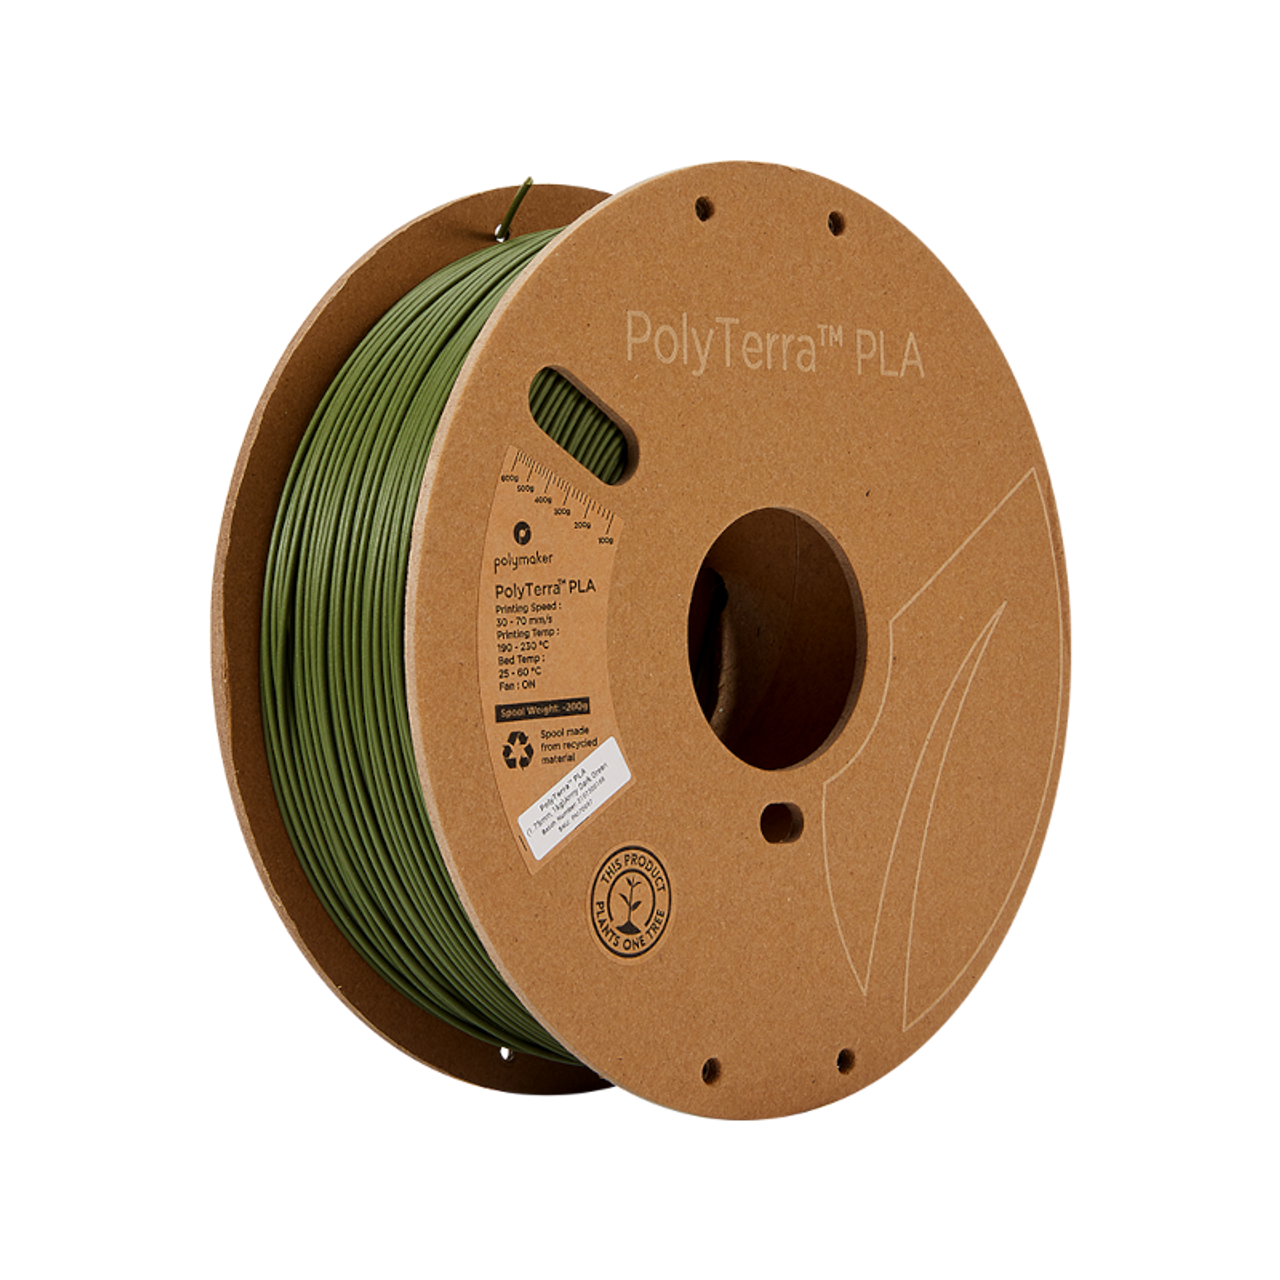 https://cdn11.bigcommerce.com/s-1vohxdh8gj/images/stencil/1280x1280/products/2116/7142/PolyTerra_PLA_Army_Dark_Green_175_Spool_Picture_Asymmetric__78995.1645803348.png?c=2?imbypass=on